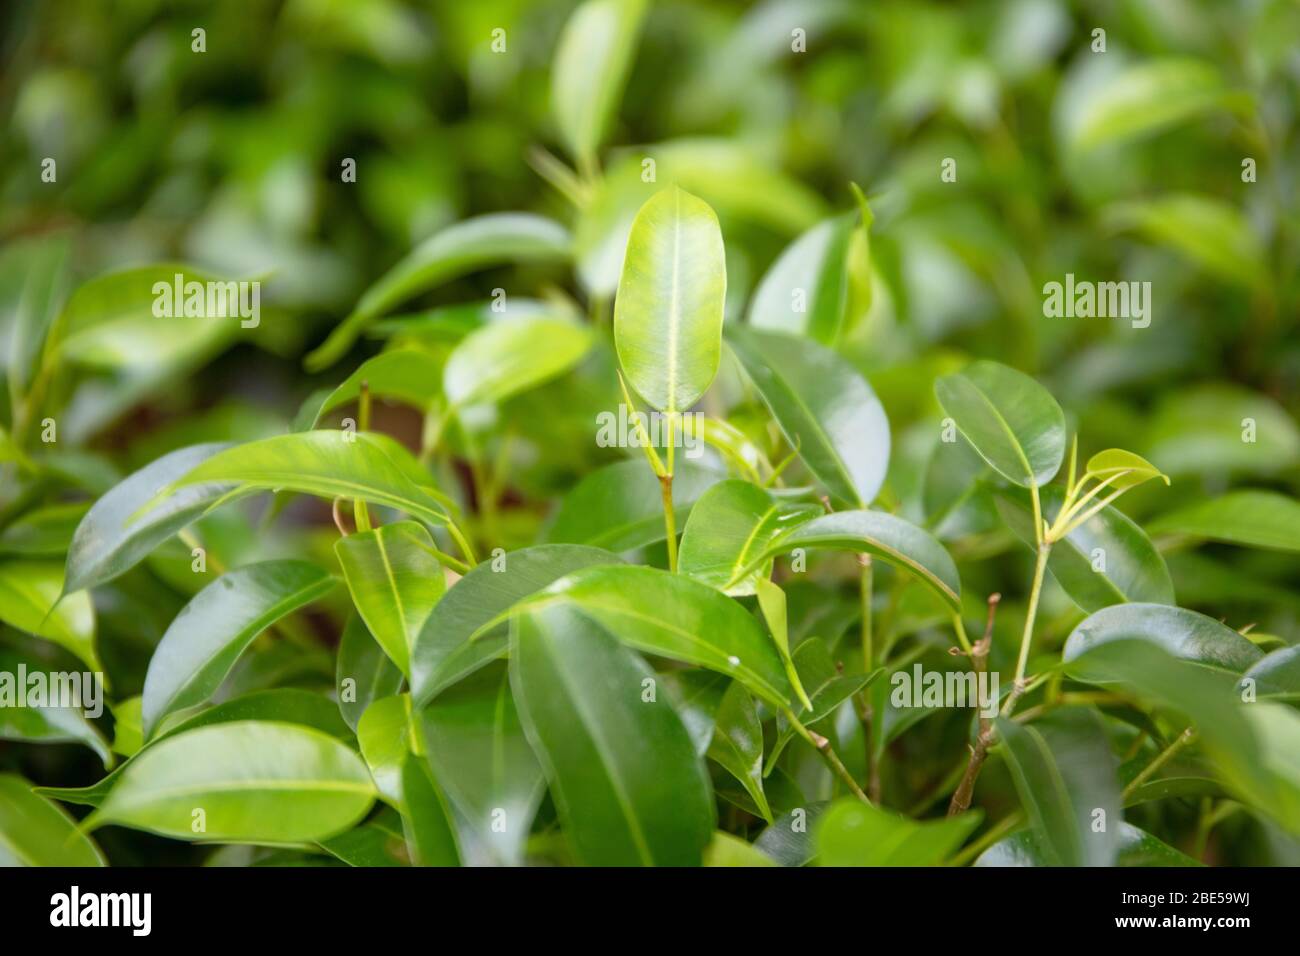 Beautiful green leaves of a tree close-up Stock Photo